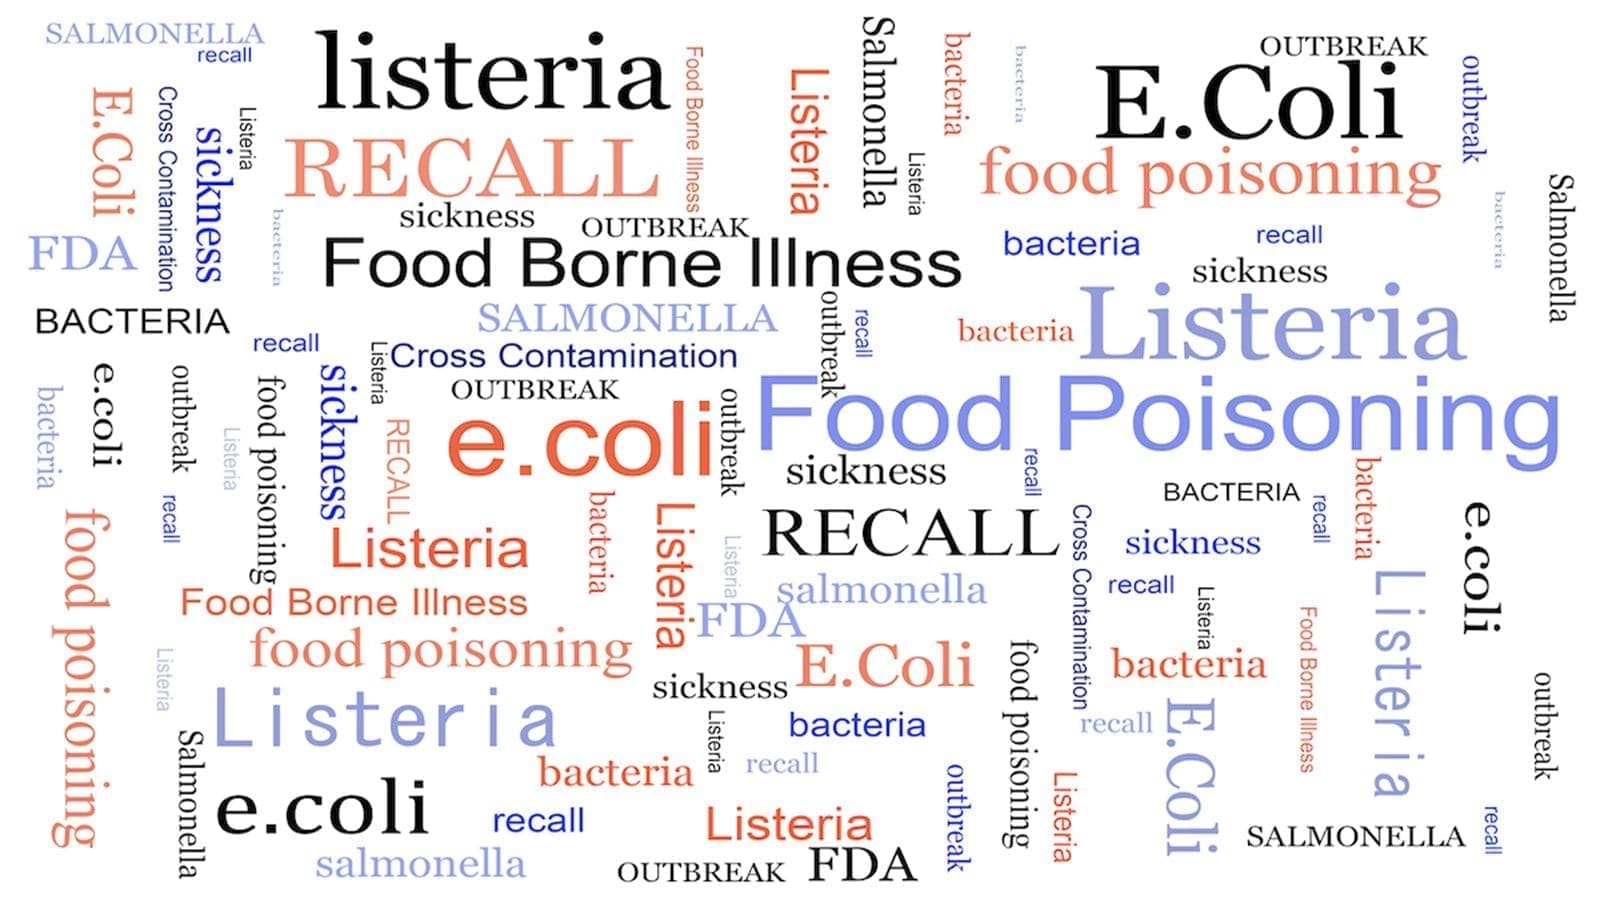 Connoisseurs estimate prevalence of foodborne disease load in African countries